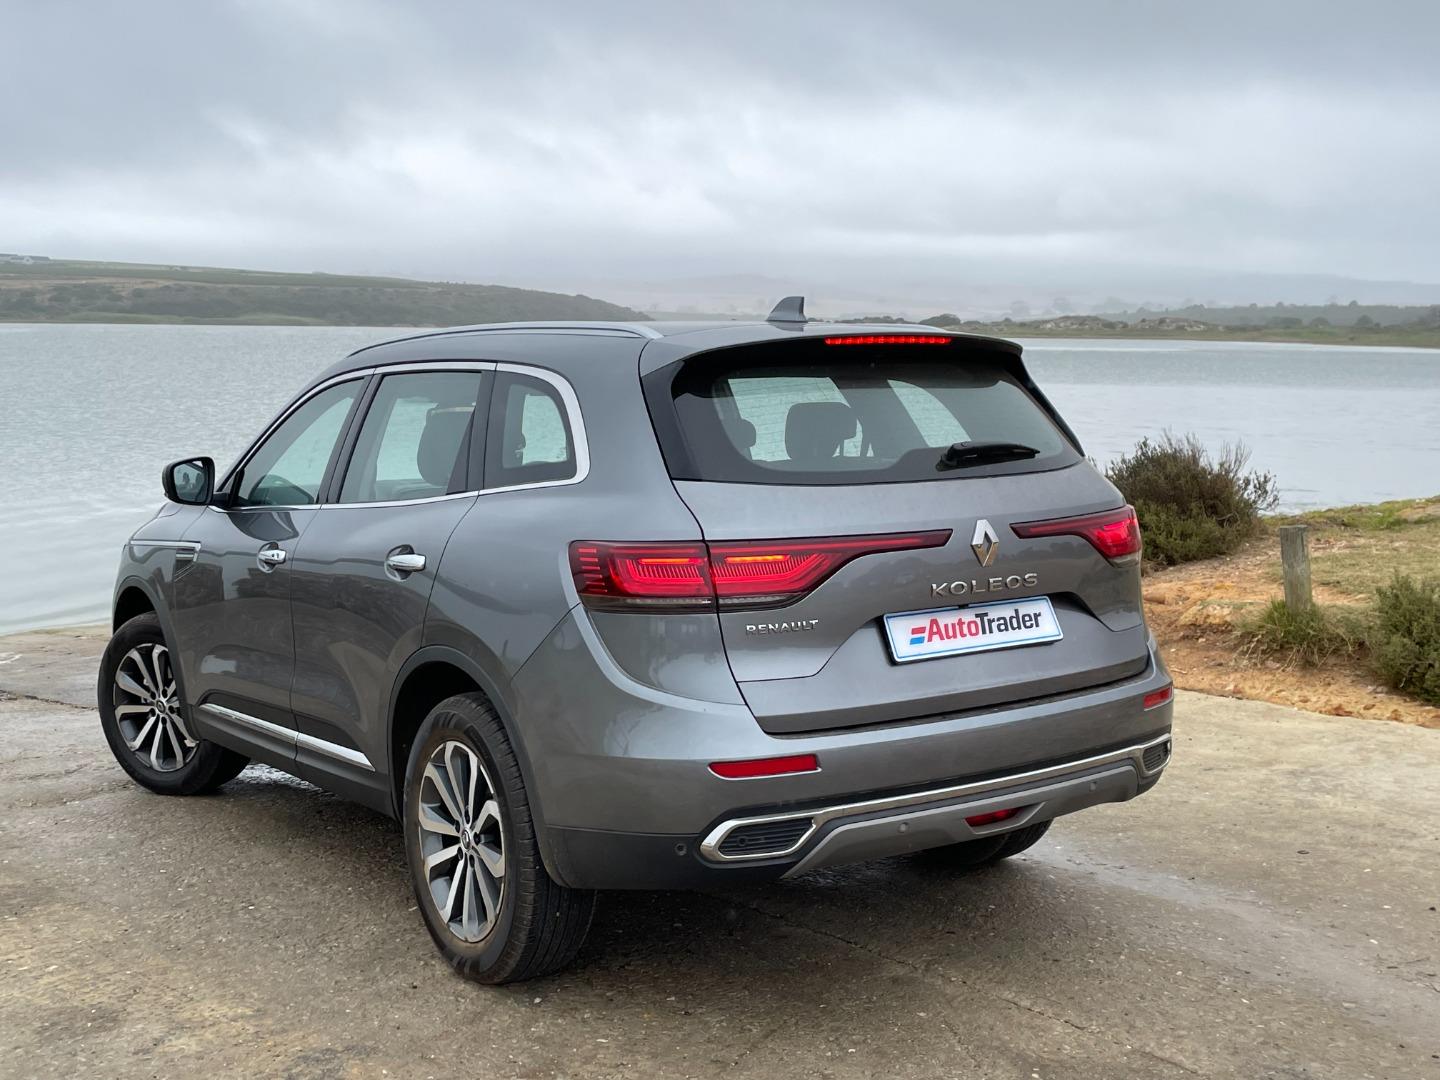 is the renault koleos good for families?